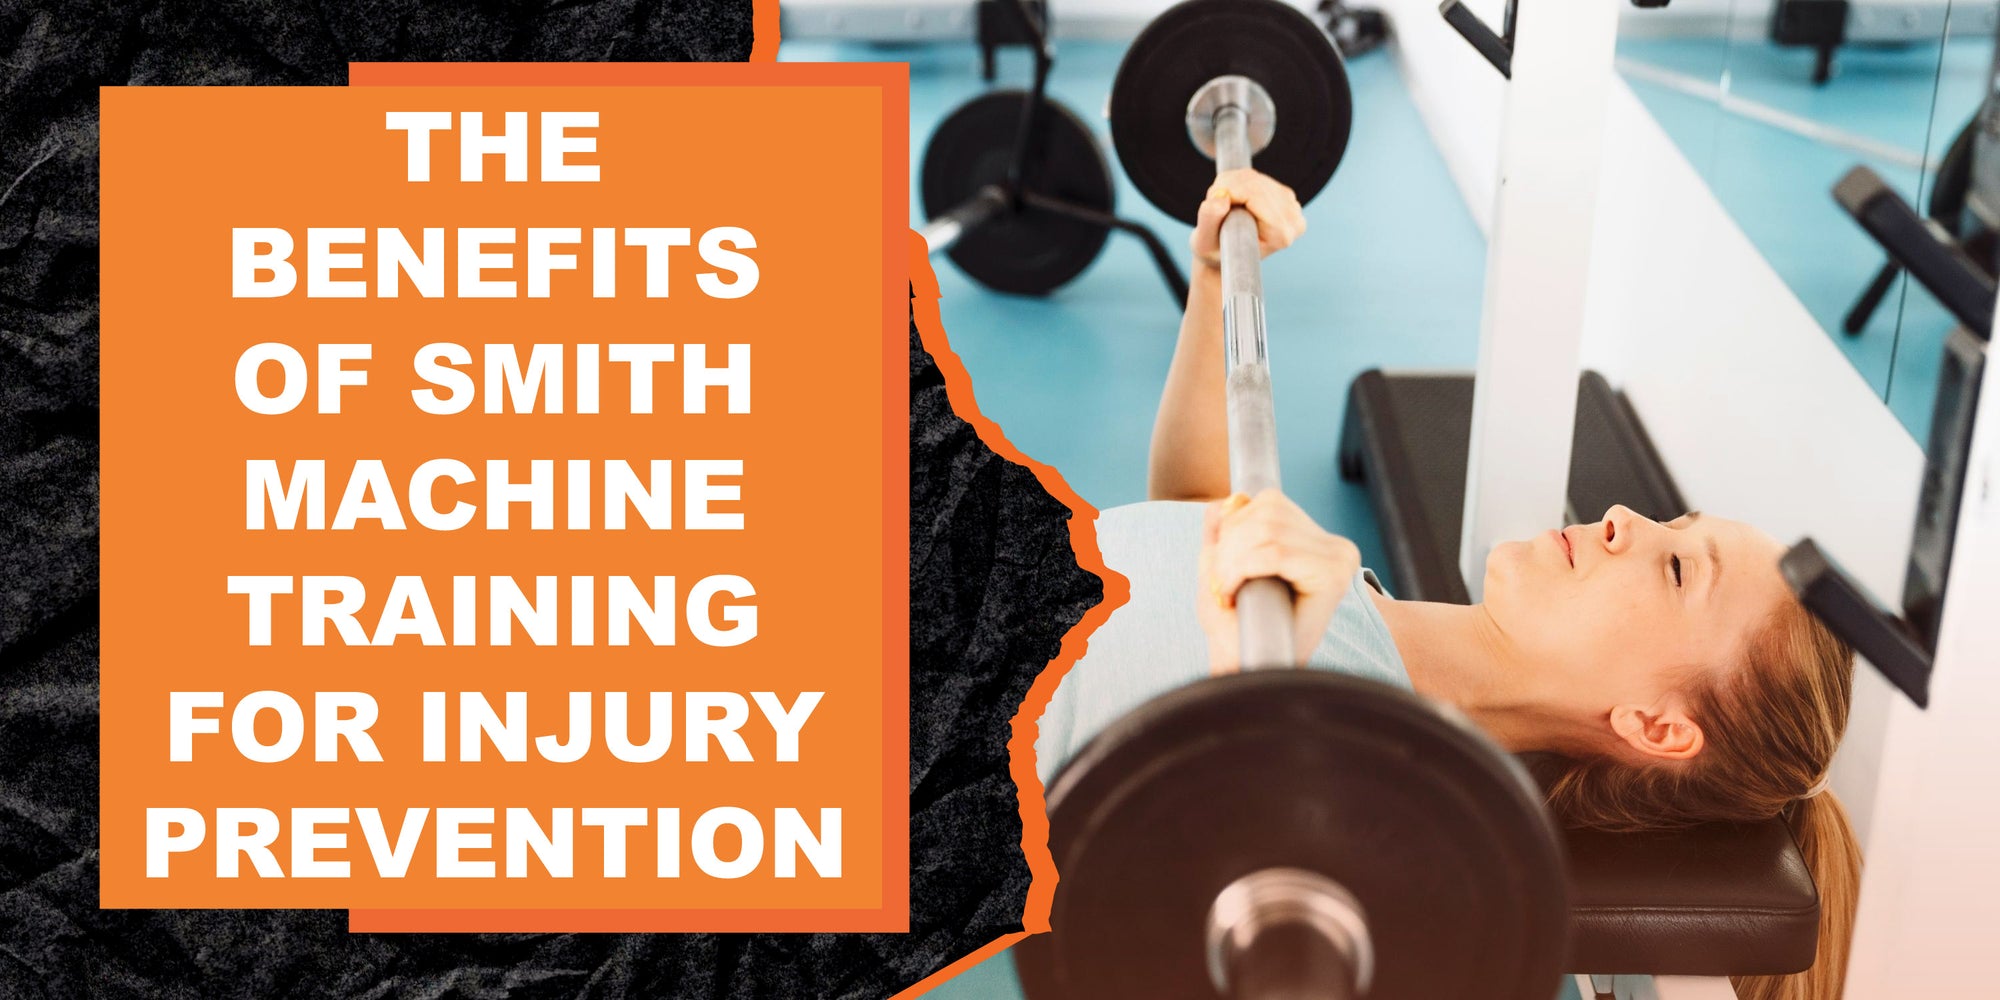 The Benefits of Smith Machine Training for Injury Prevention